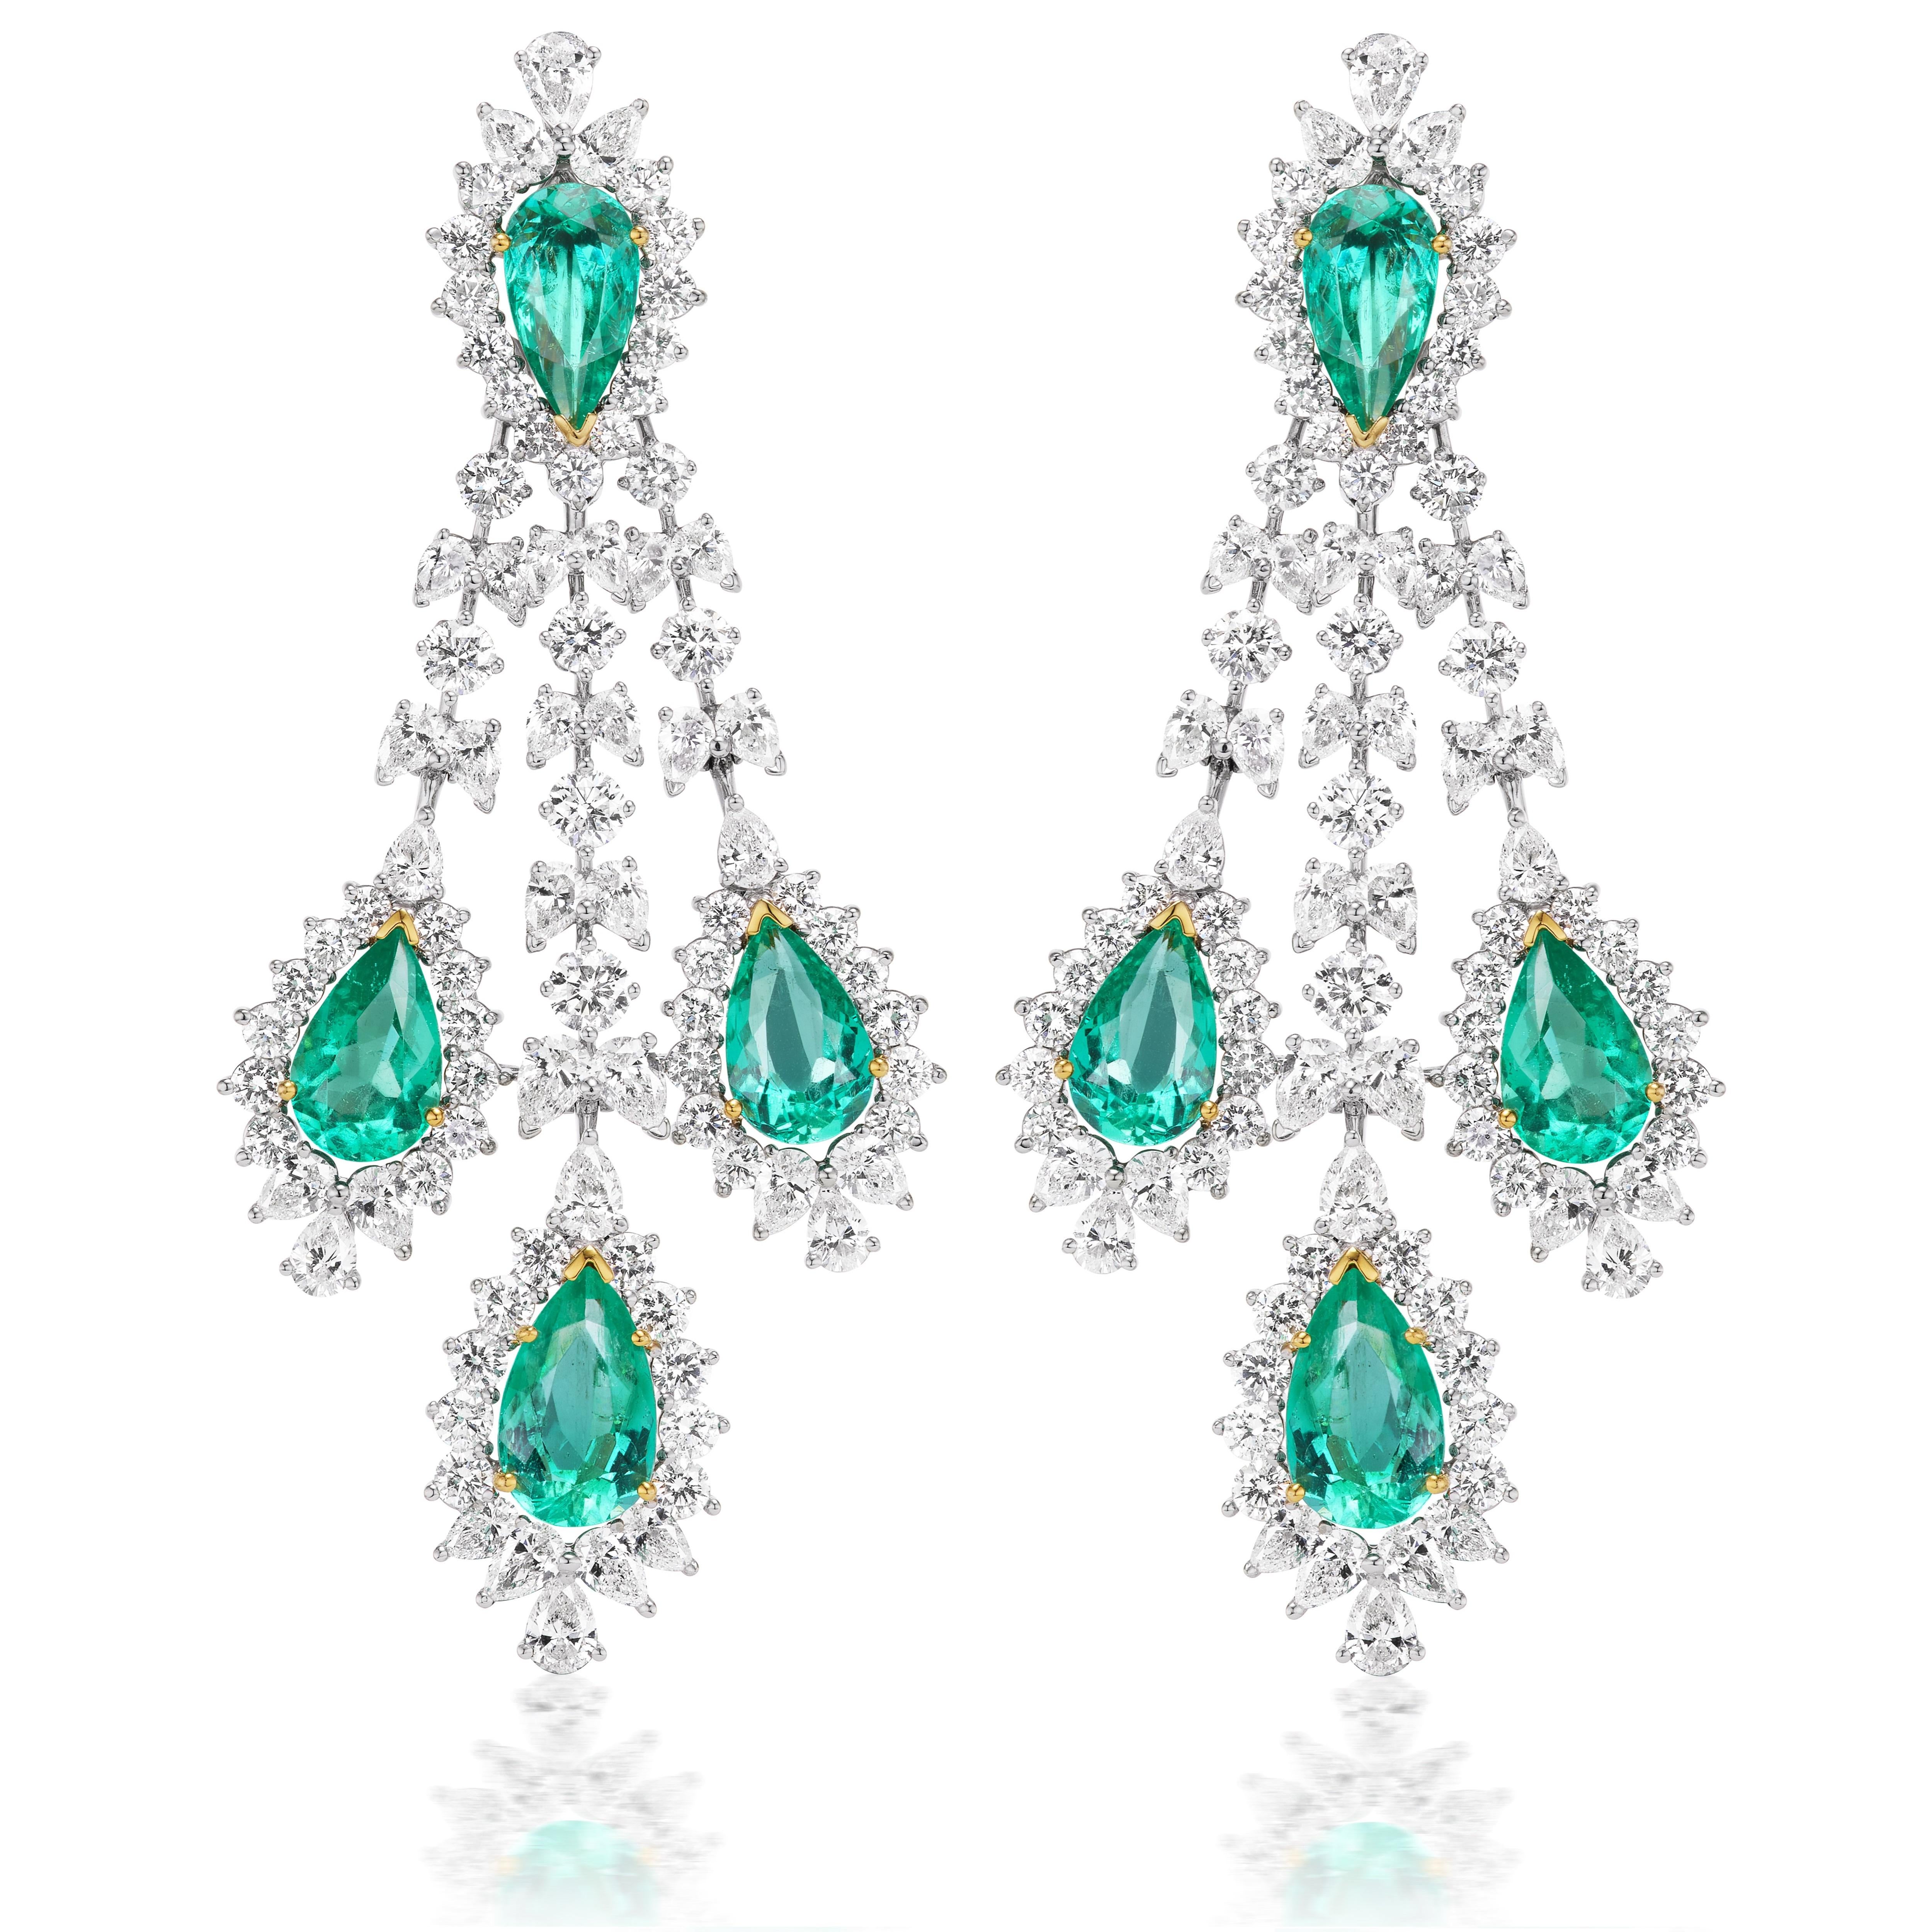 Van Necklace & Earrings Suite (220.66 ct Colombian Emeralds & Diamonds) in 18K In New Condition For Sale In New York, NY